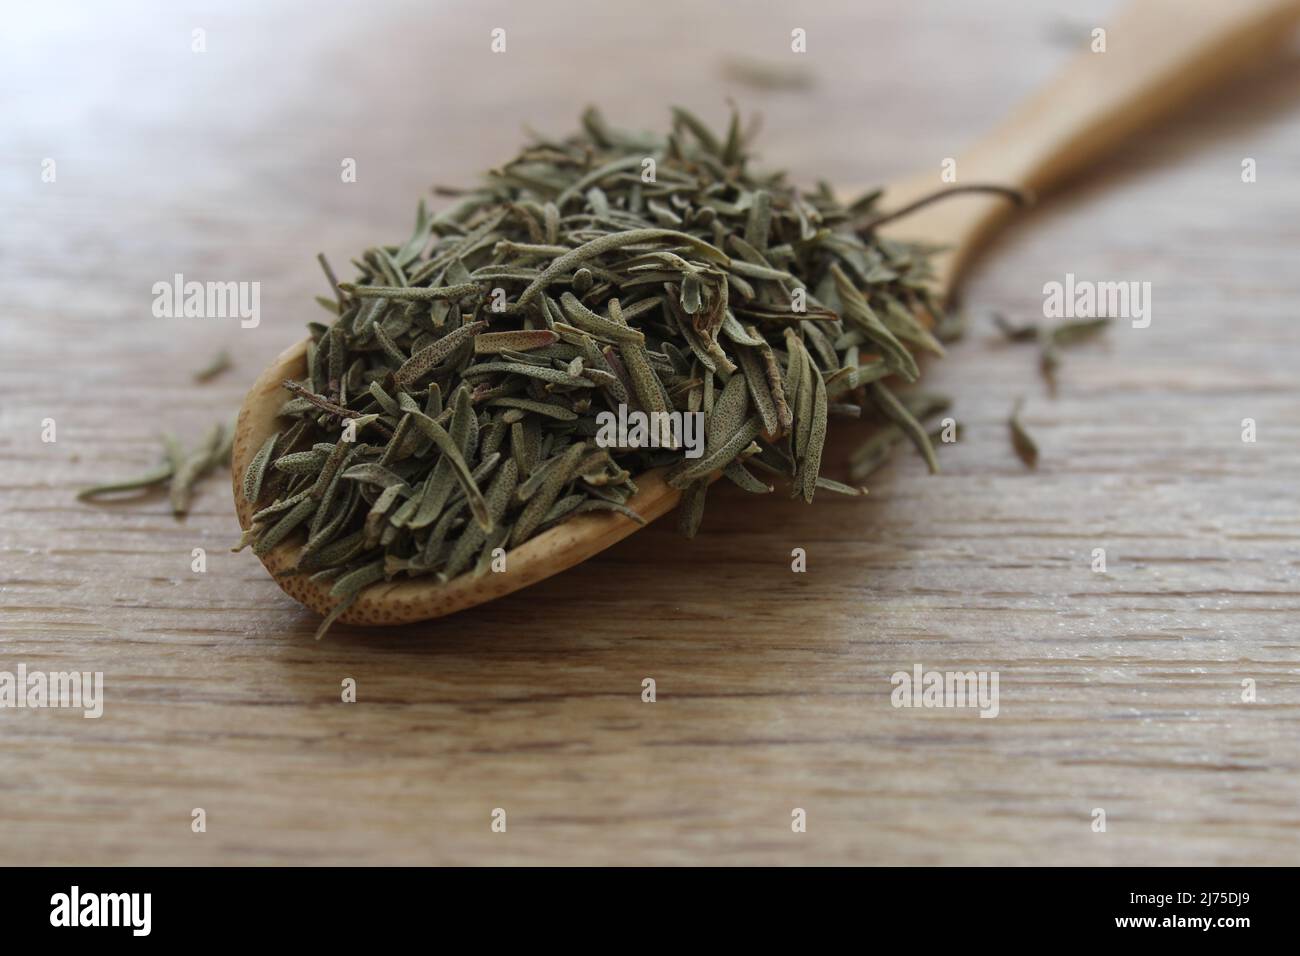 Dry rosemary in wooden scoop on table. Rosemary leaves prepared for herbal tea or traditional medicine. Stock Photo